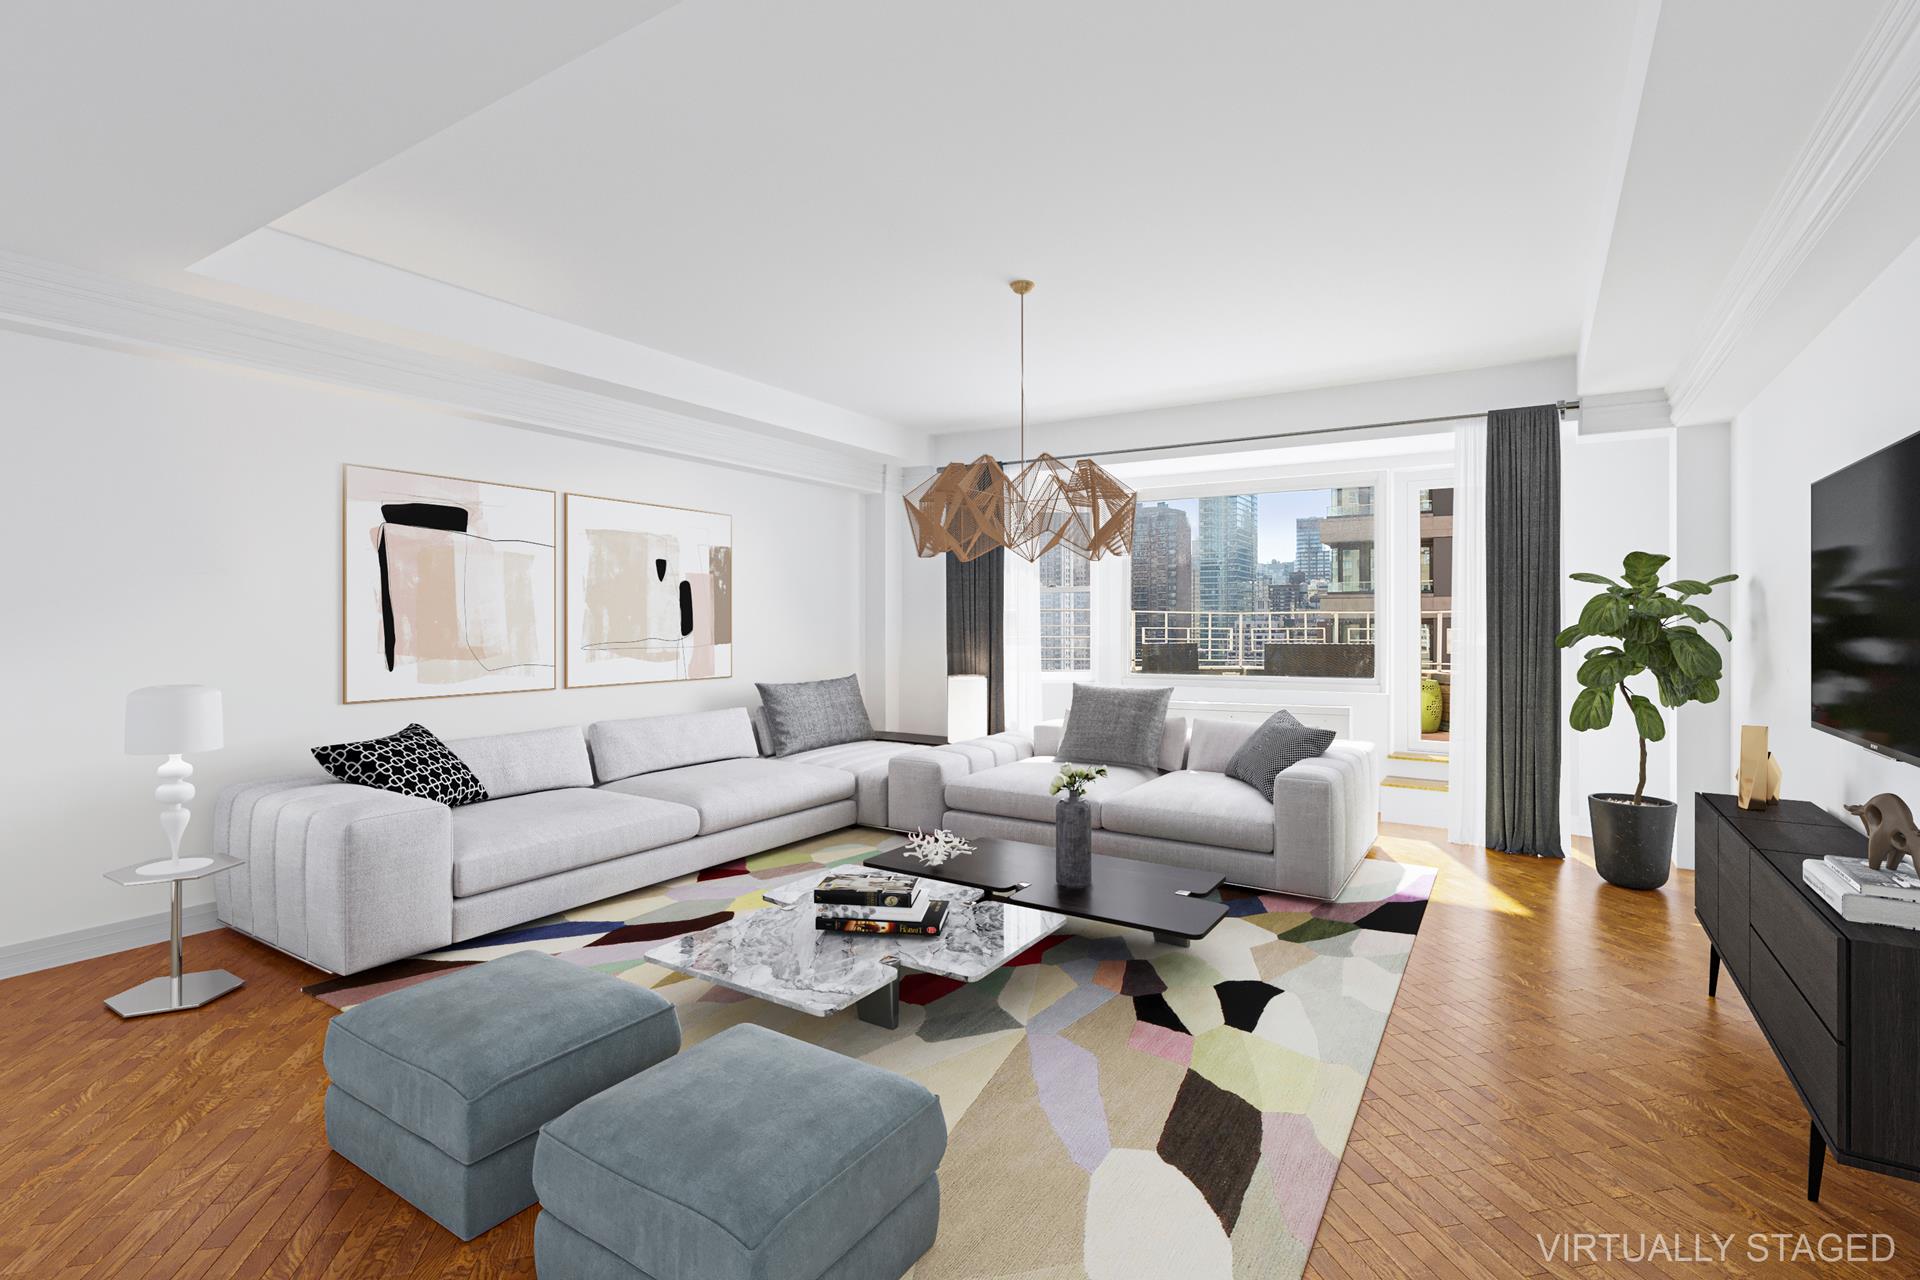 205 East 63rd Street 17A, Lenox Hill, Upper East Side, NYC - 4 Bedrooms  
4 Bathrooms  
8 Rooms - 